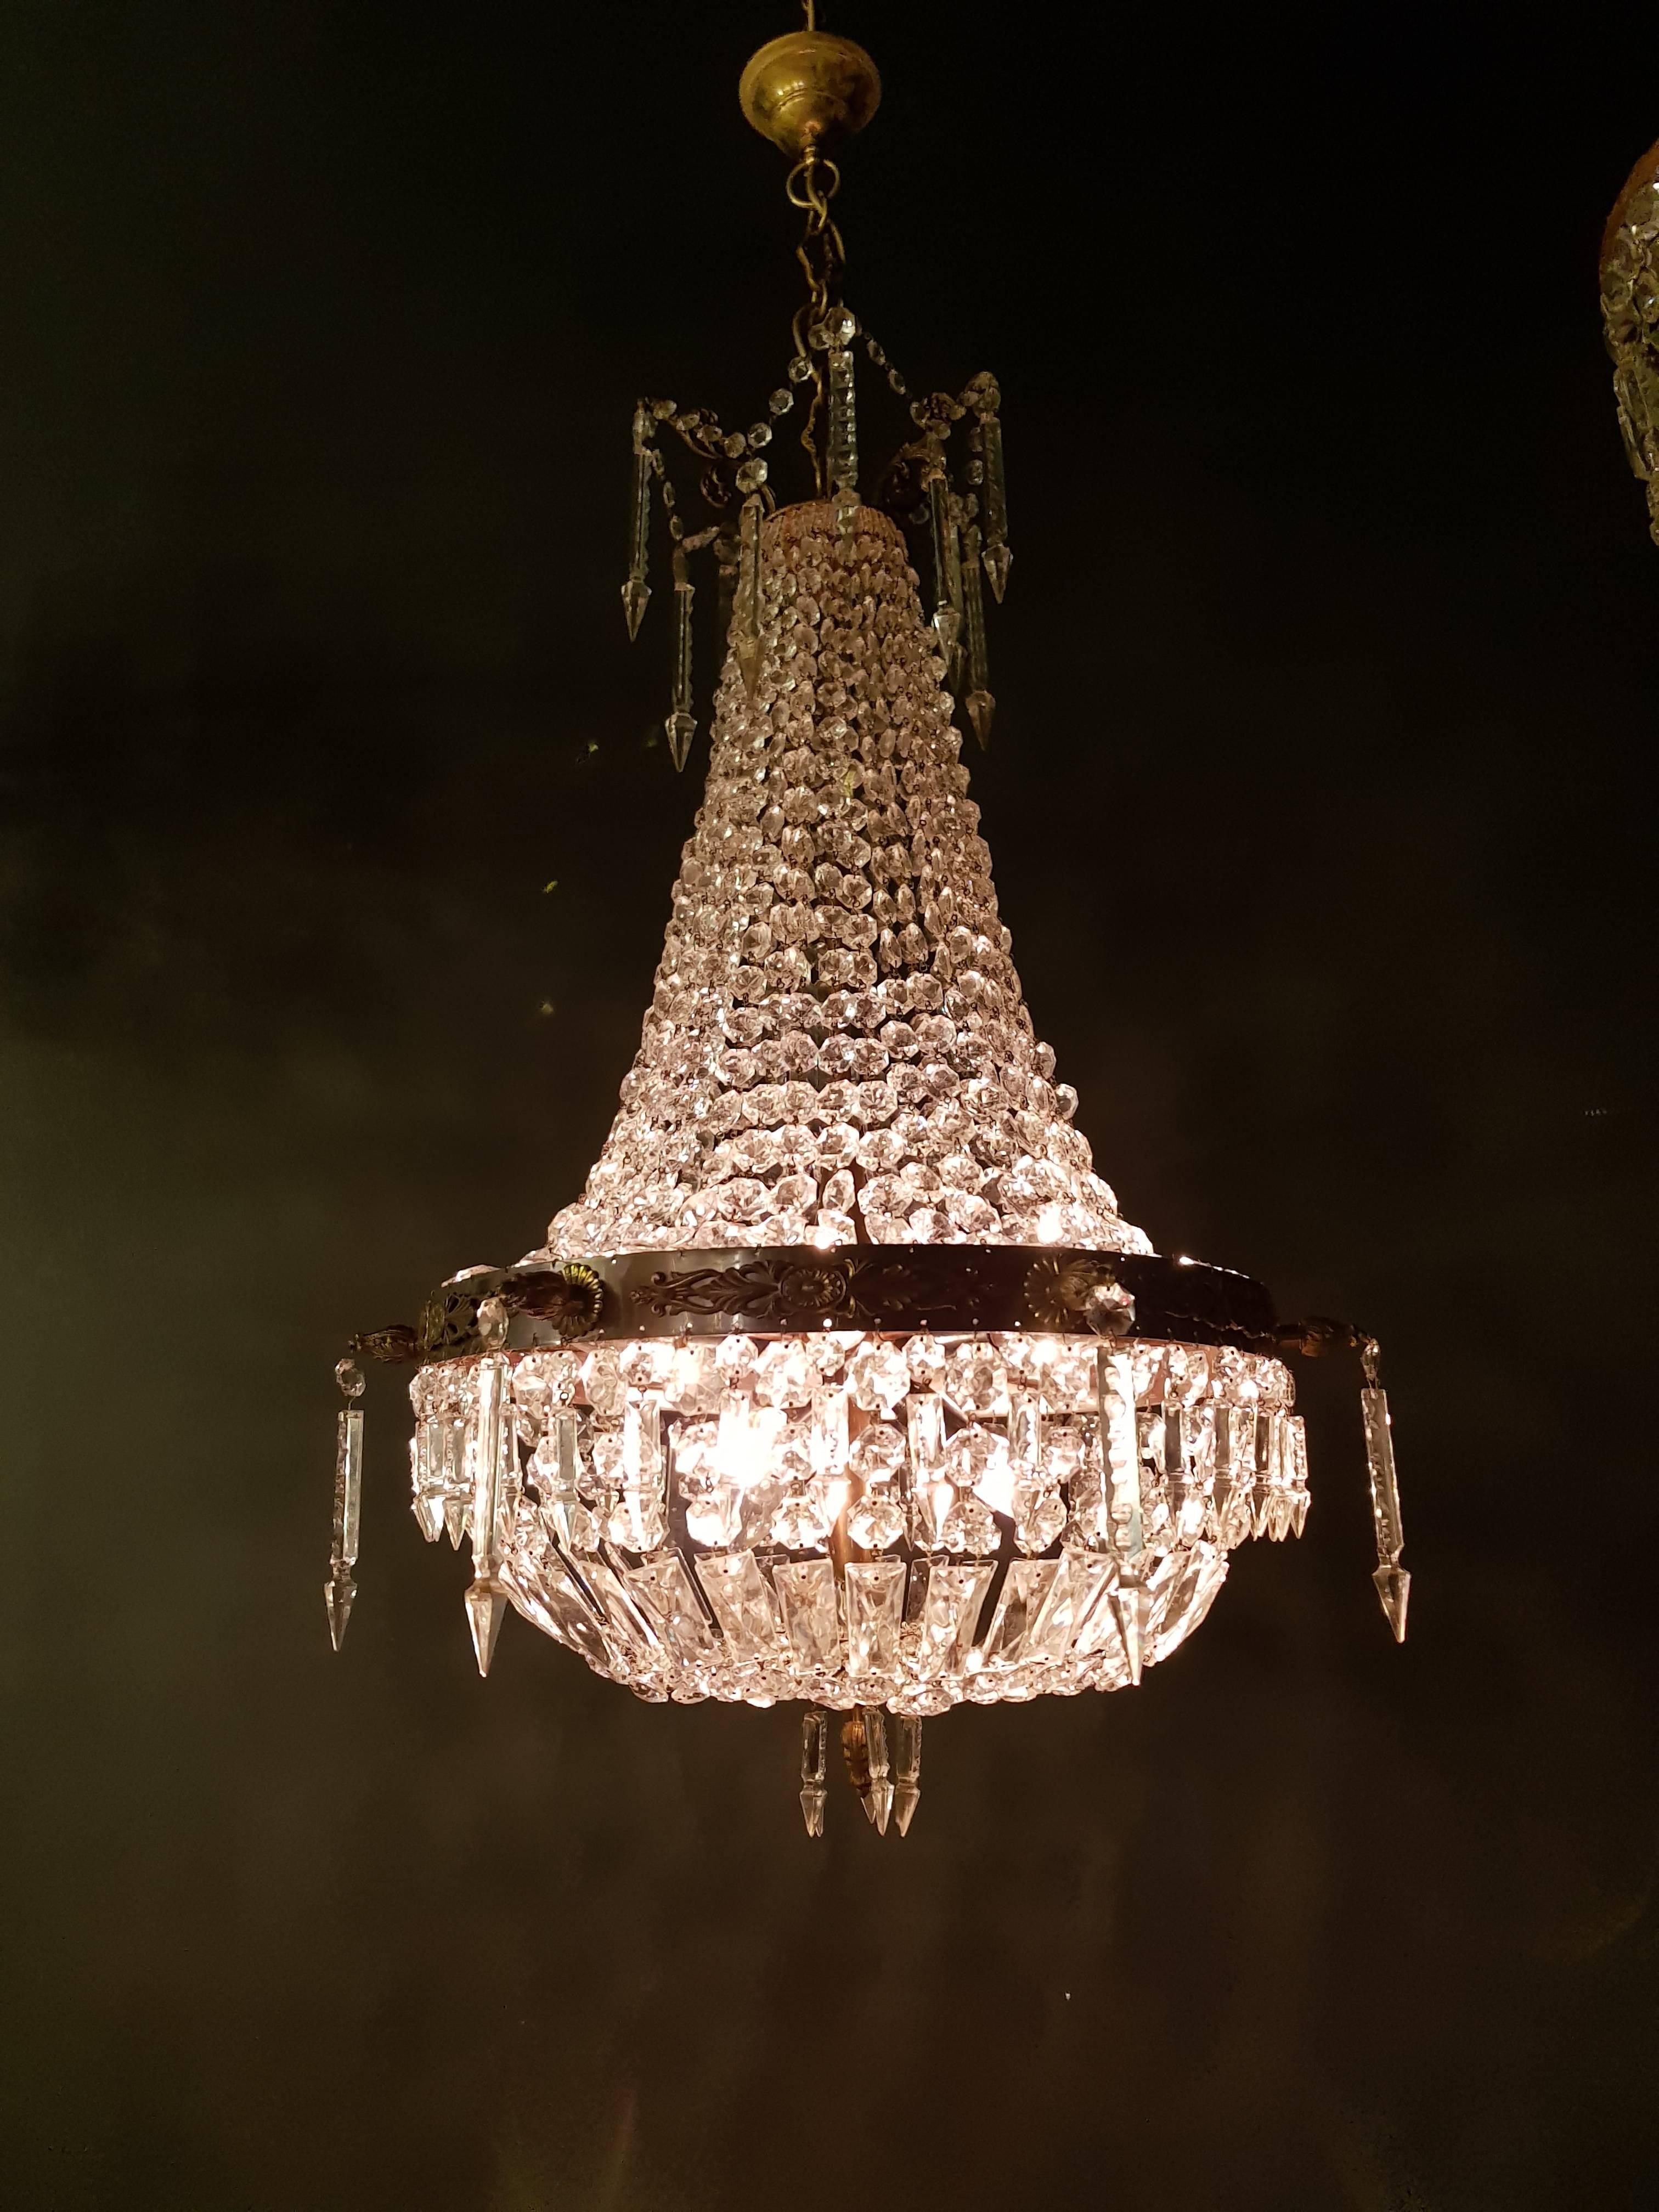 Original preserved Sac a Pearl crystal chandelier, circa 1930. Cabling completely renewed. Crystal hand-knotted
Measures: Total height: 120 cm, height without chain: 90 cm, diameter 60 cm, weight (approximately) 9kg.

Number of lights: nine-light